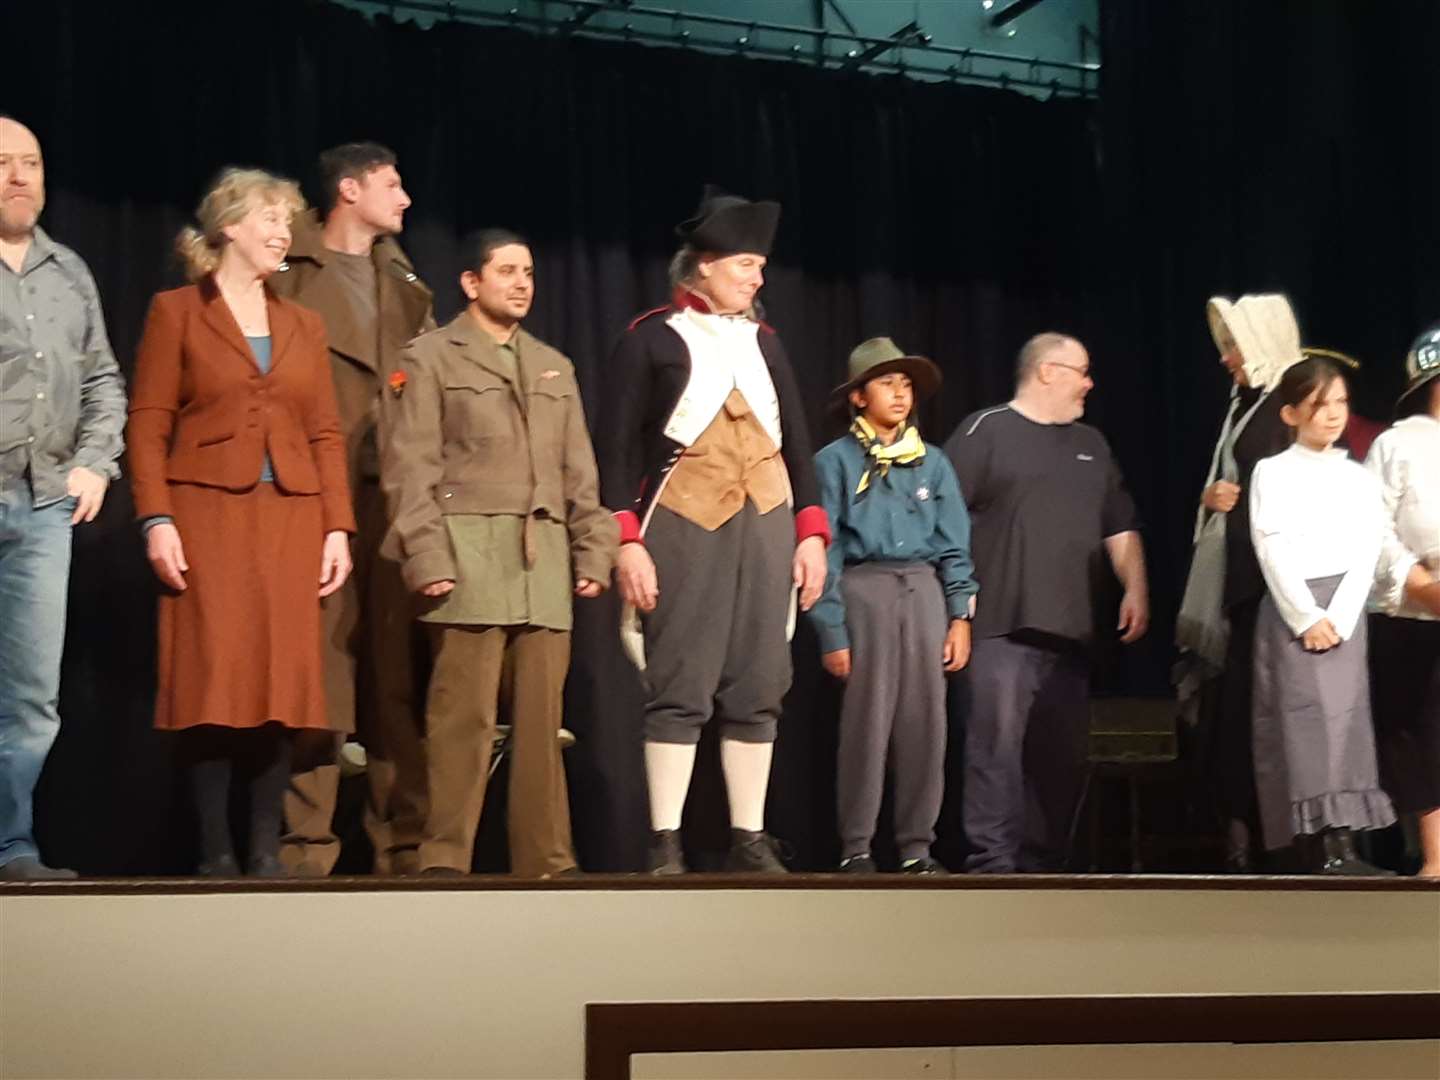 The Headcorn History Pageant in support of the Heart of Headcorn campaign